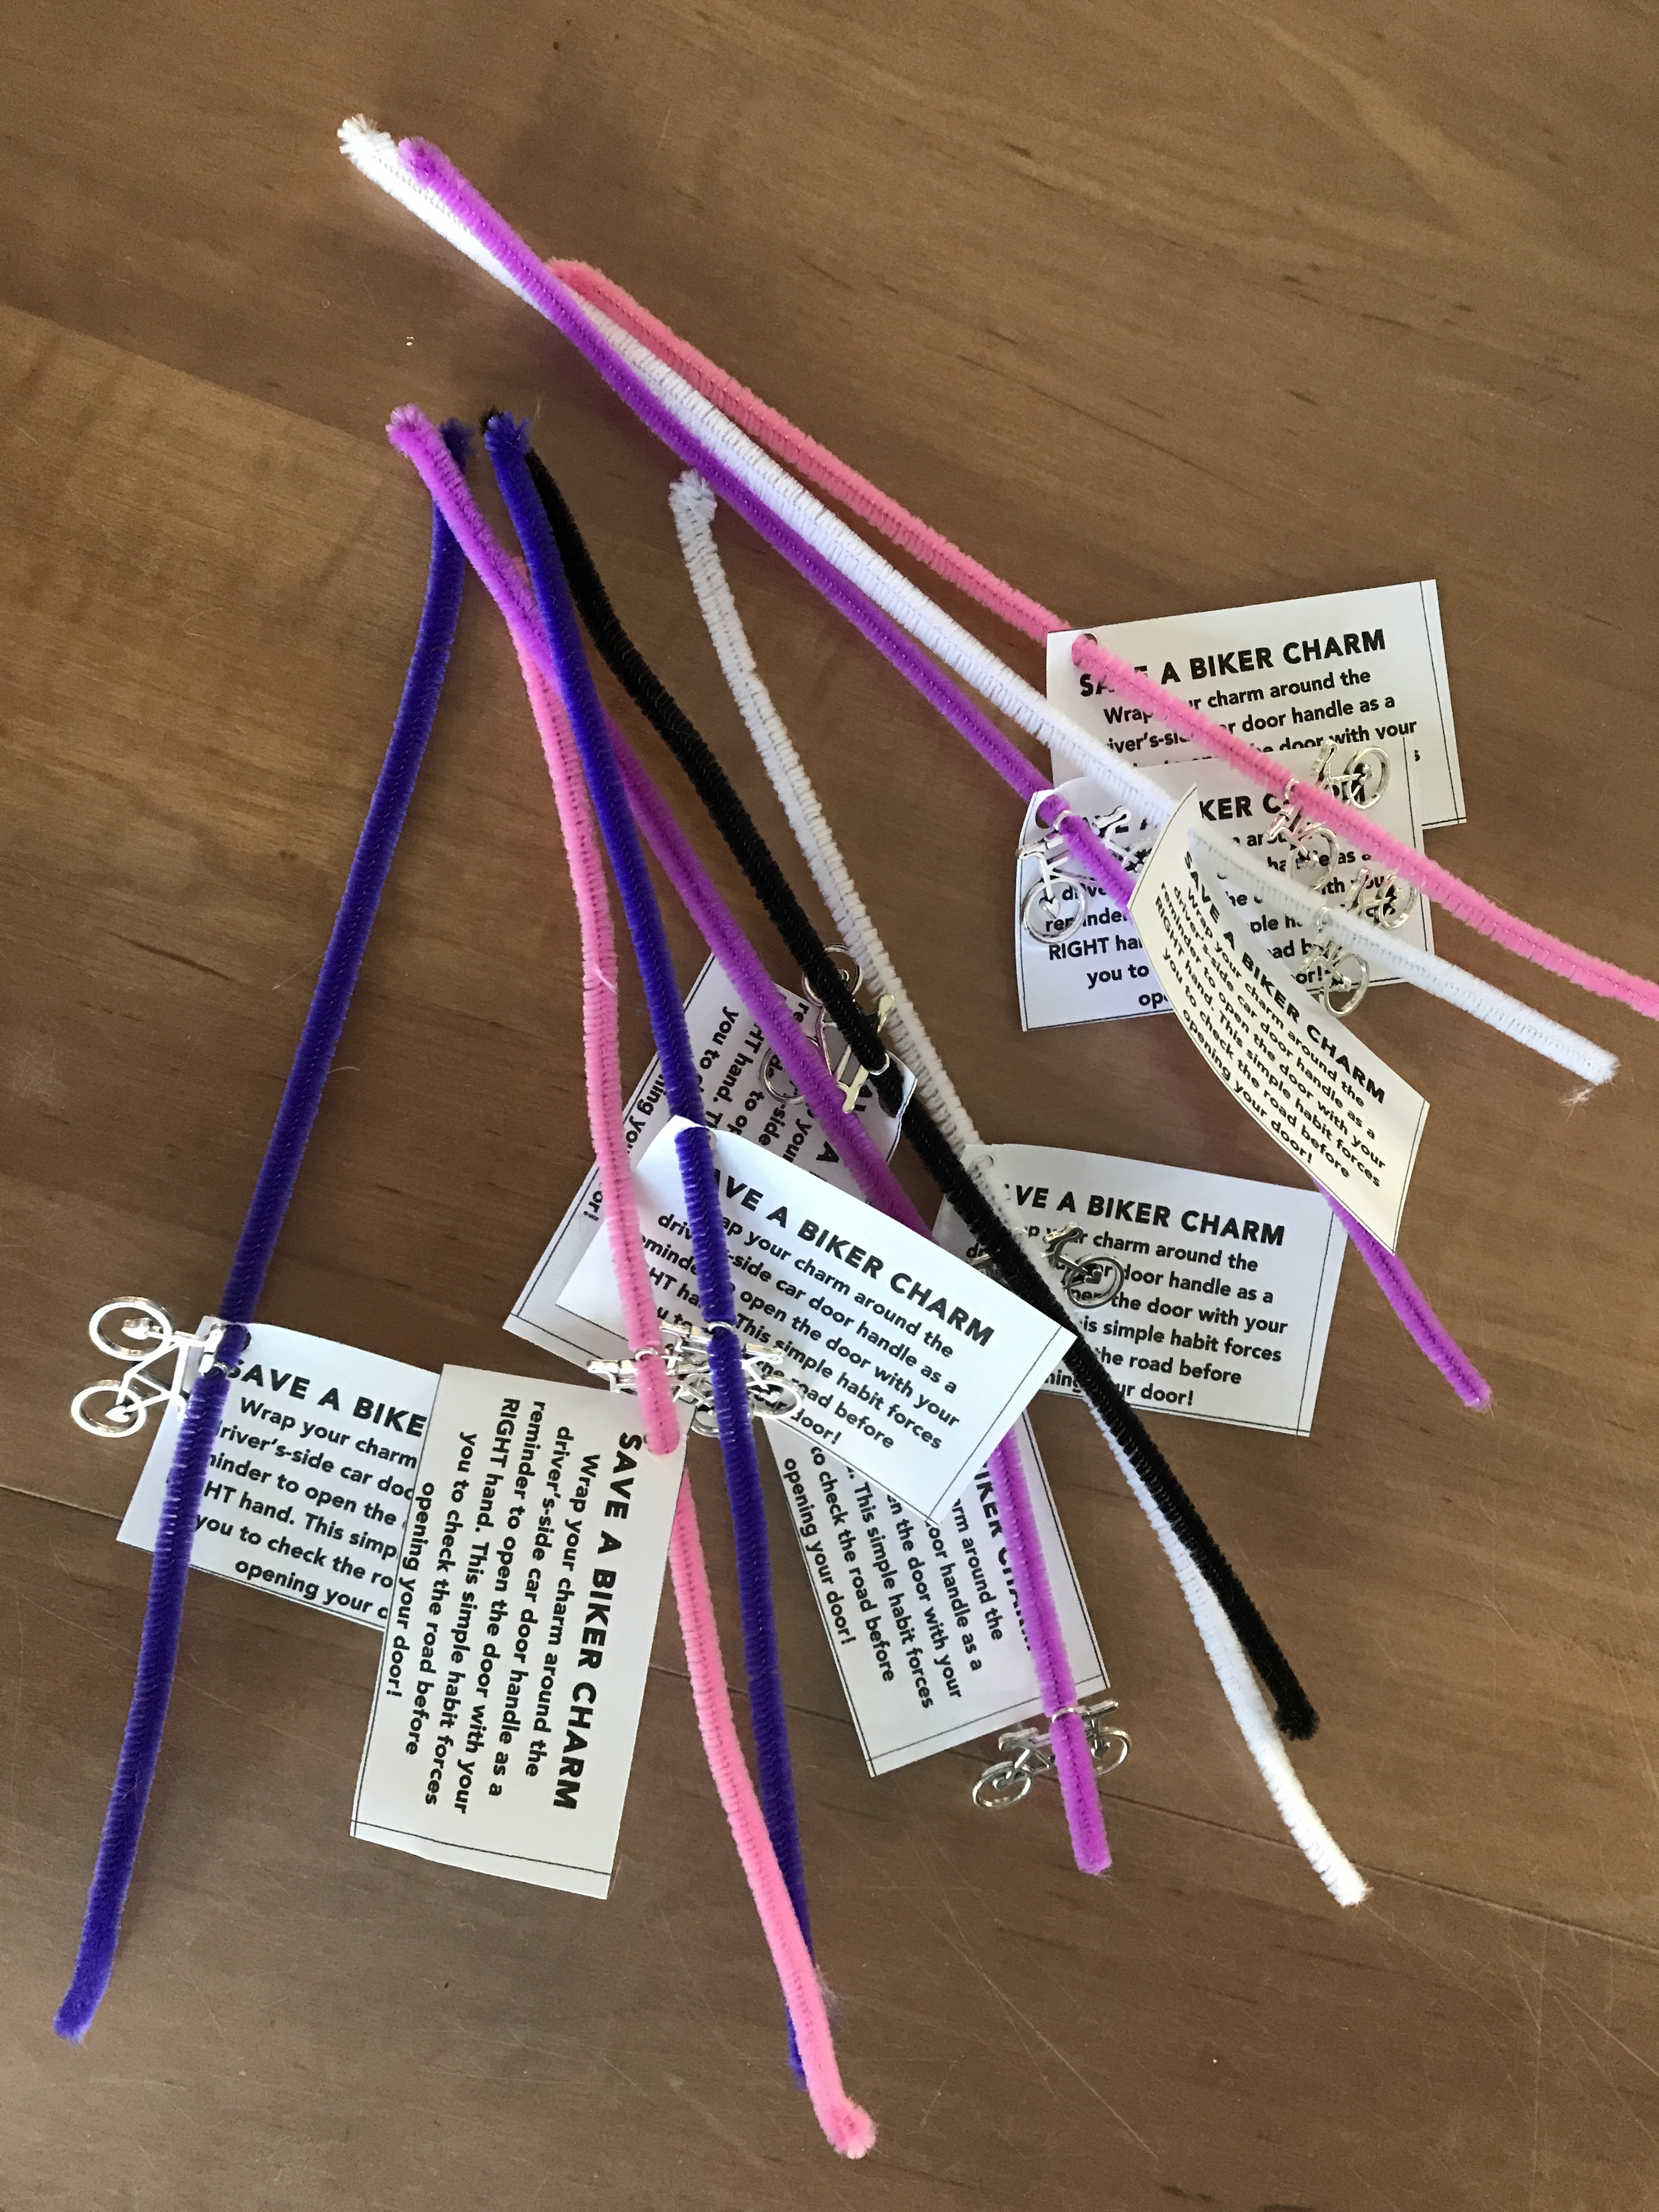 Examples of Dutch Reach reminders or aide de memoire made of a tag with Dutch reach text on paper, attached to pipe-cleaners.